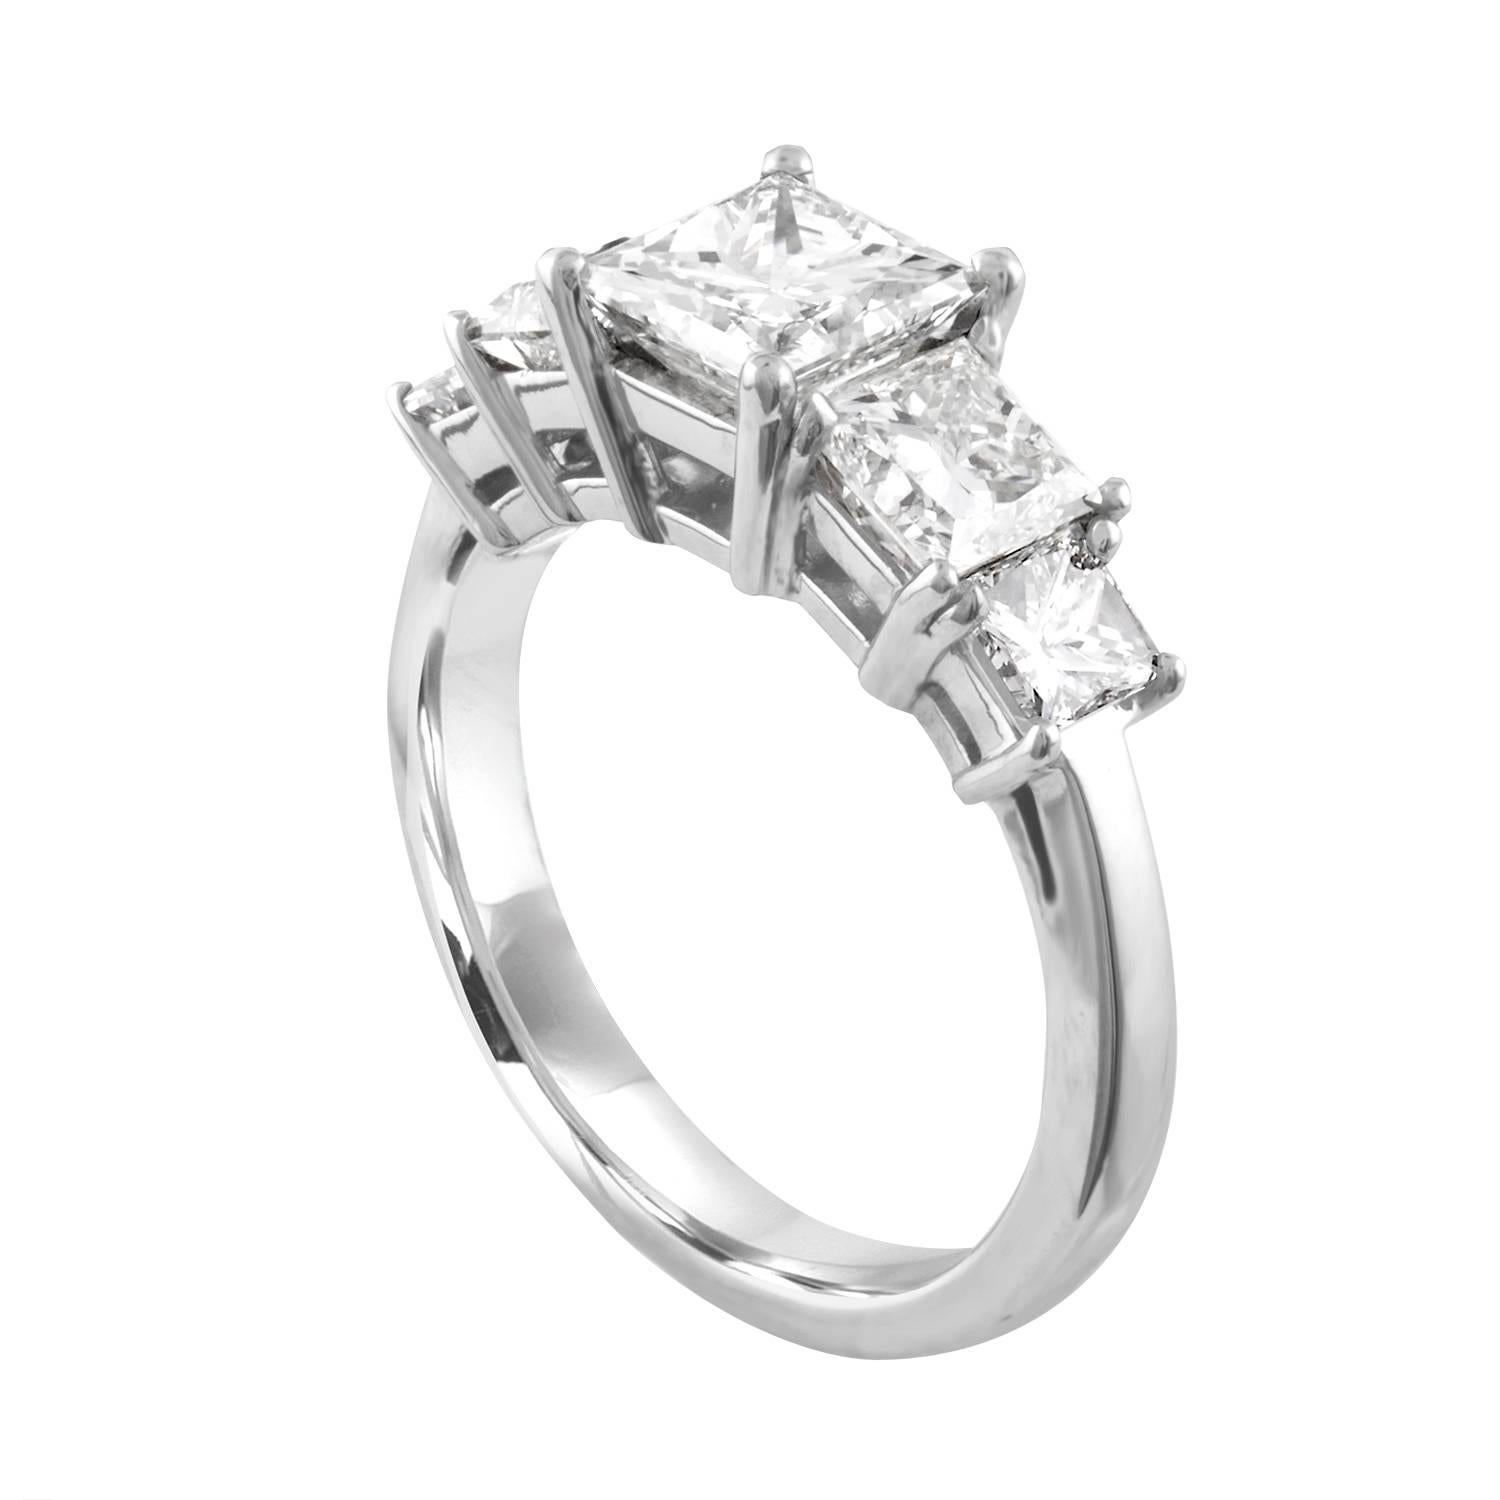 Classically Stunning Five Stone Ring
The ring is Platinum
There are 5 Princess Cut Diamonds All GIA Certified Stones
The center is Carat 1.05 J VS1 Princess Cut Diamond
The side is Carats 0.53 J VVS2 and 0.54 J VVS2
The far side is Carats 0.20 G VS1